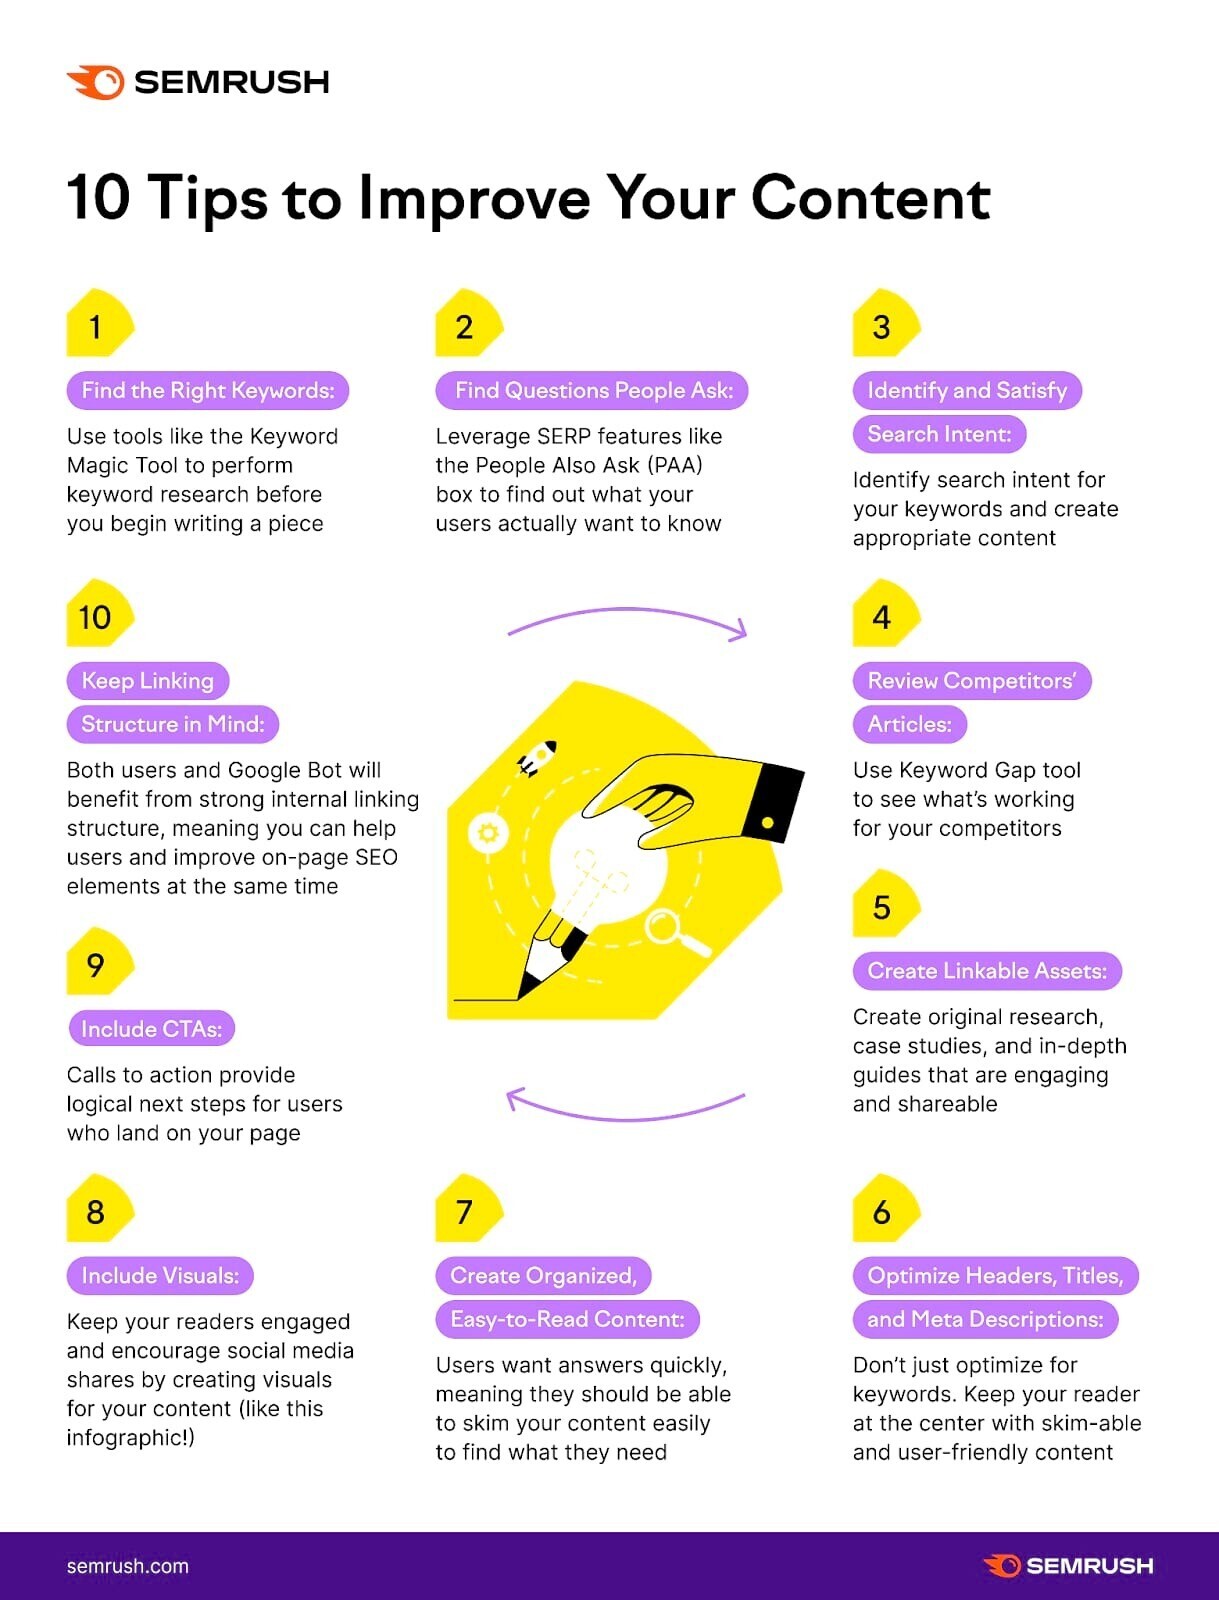 an infographic on "10 tips to improve your content"